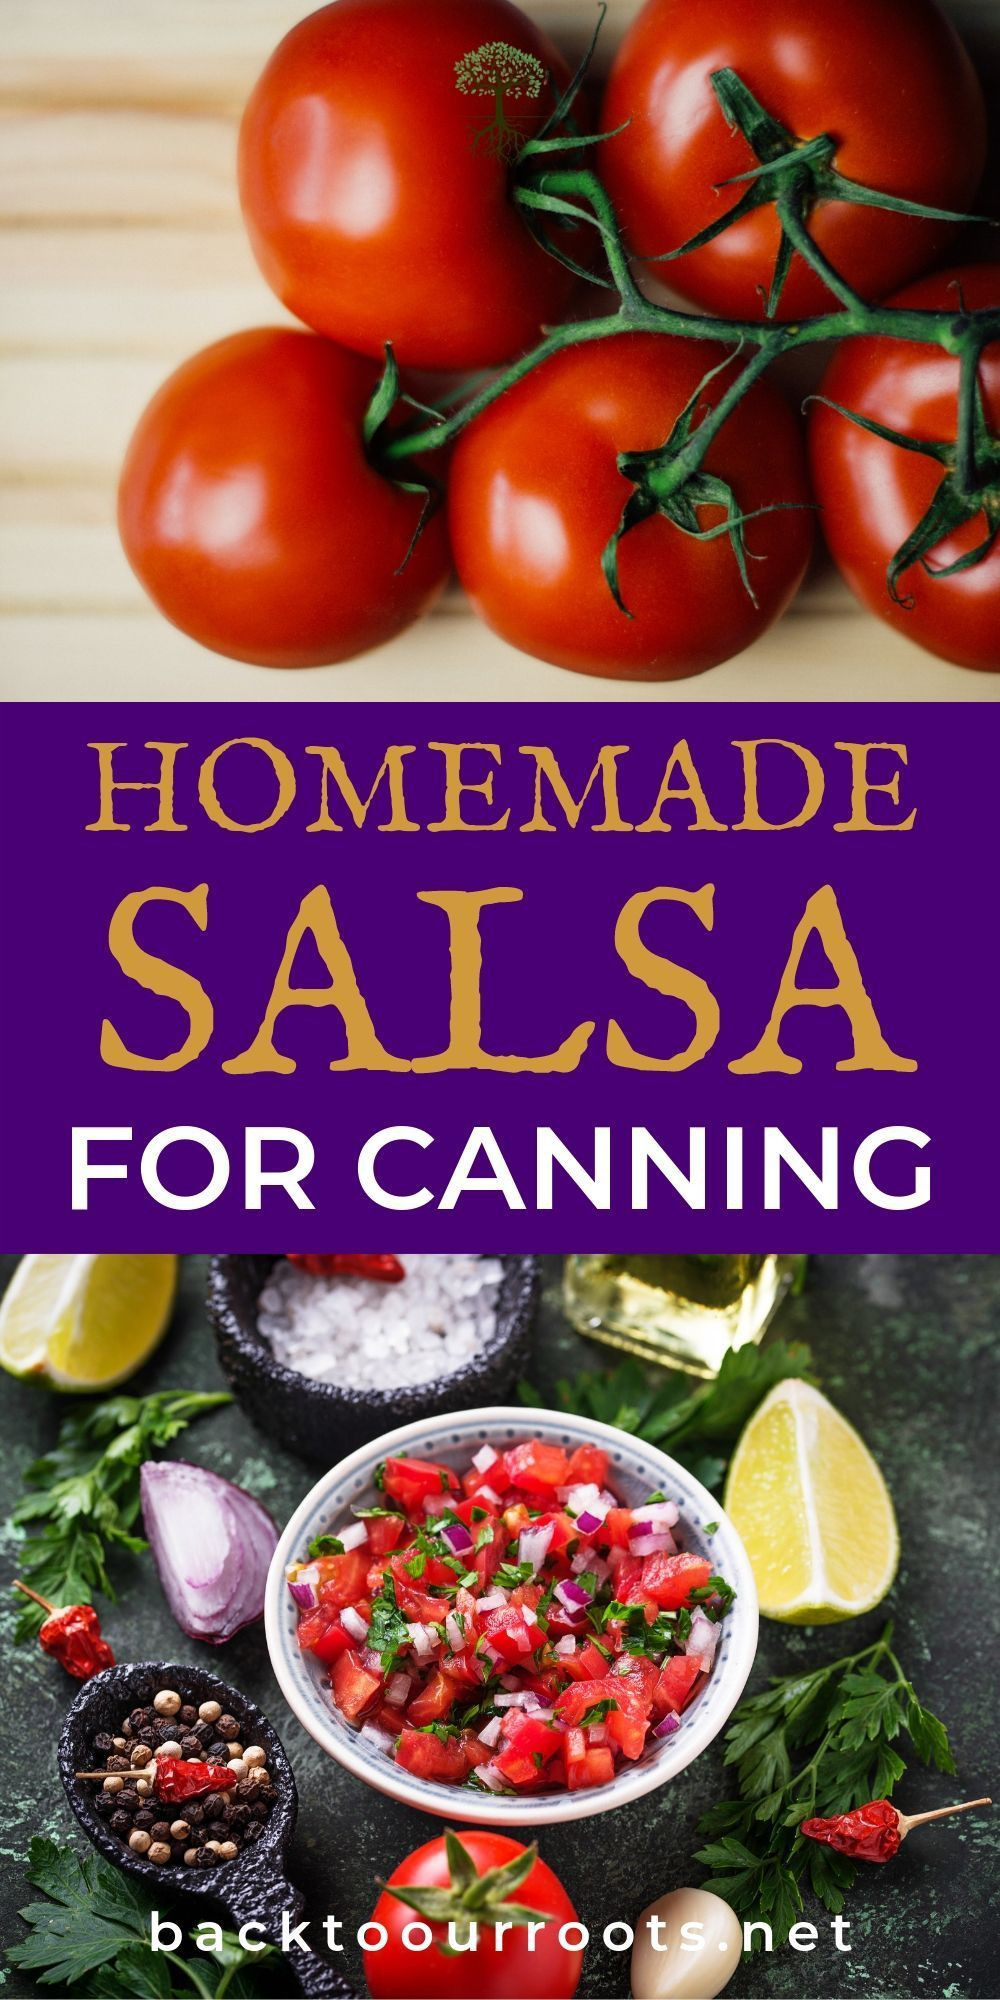 Mexican Salsa Recipe For Canning
 The Best Homemade Salsa Recipe for Canning